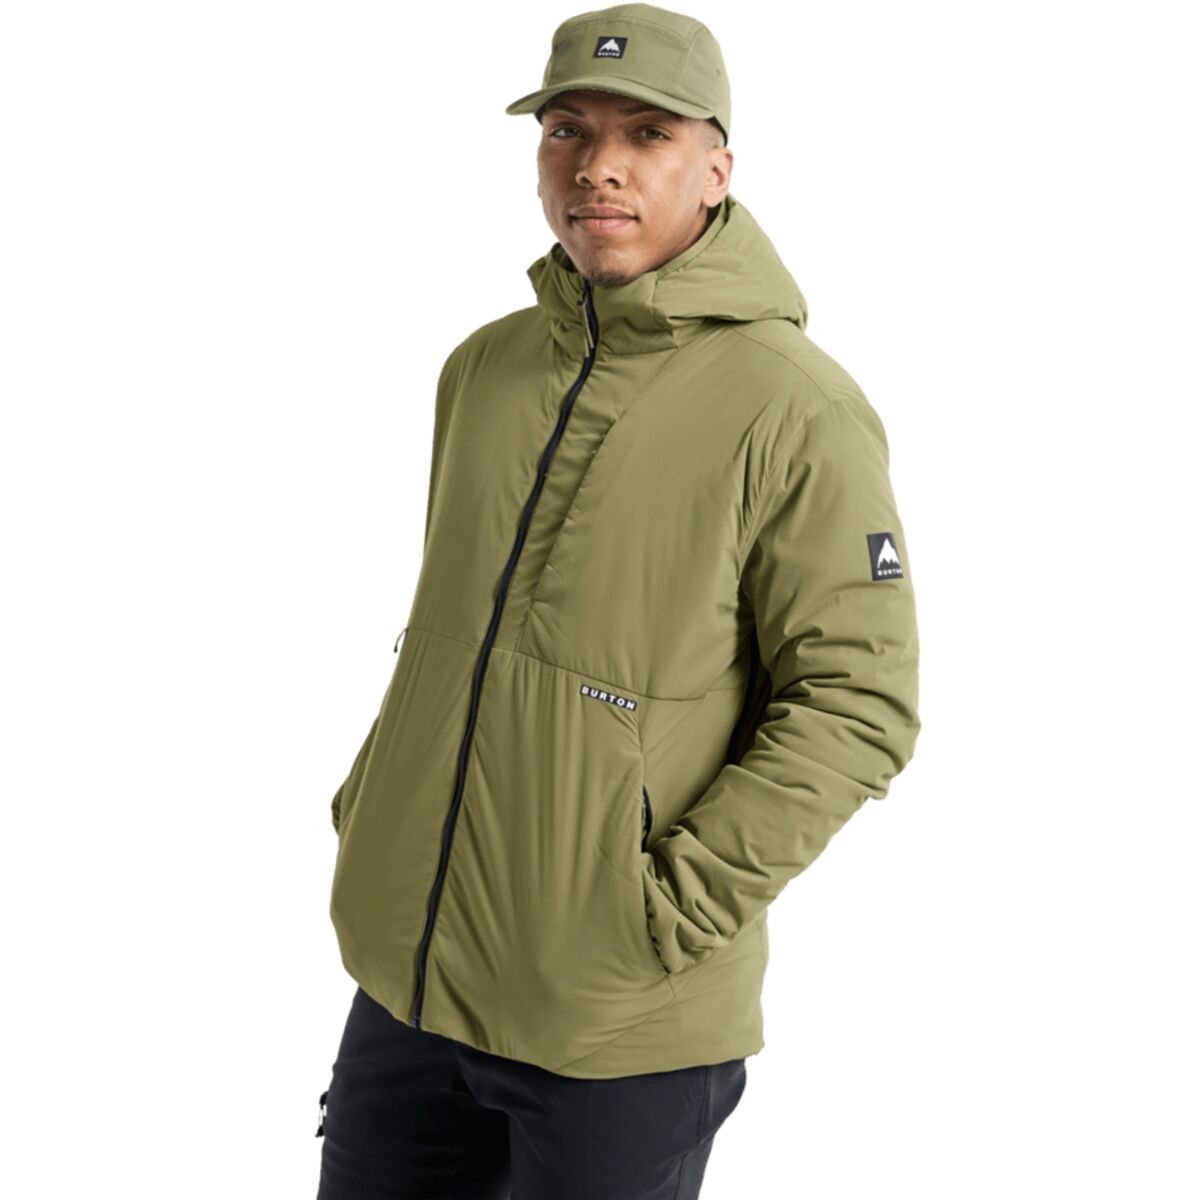 Multipath Hooded Insulated Jacket - Men